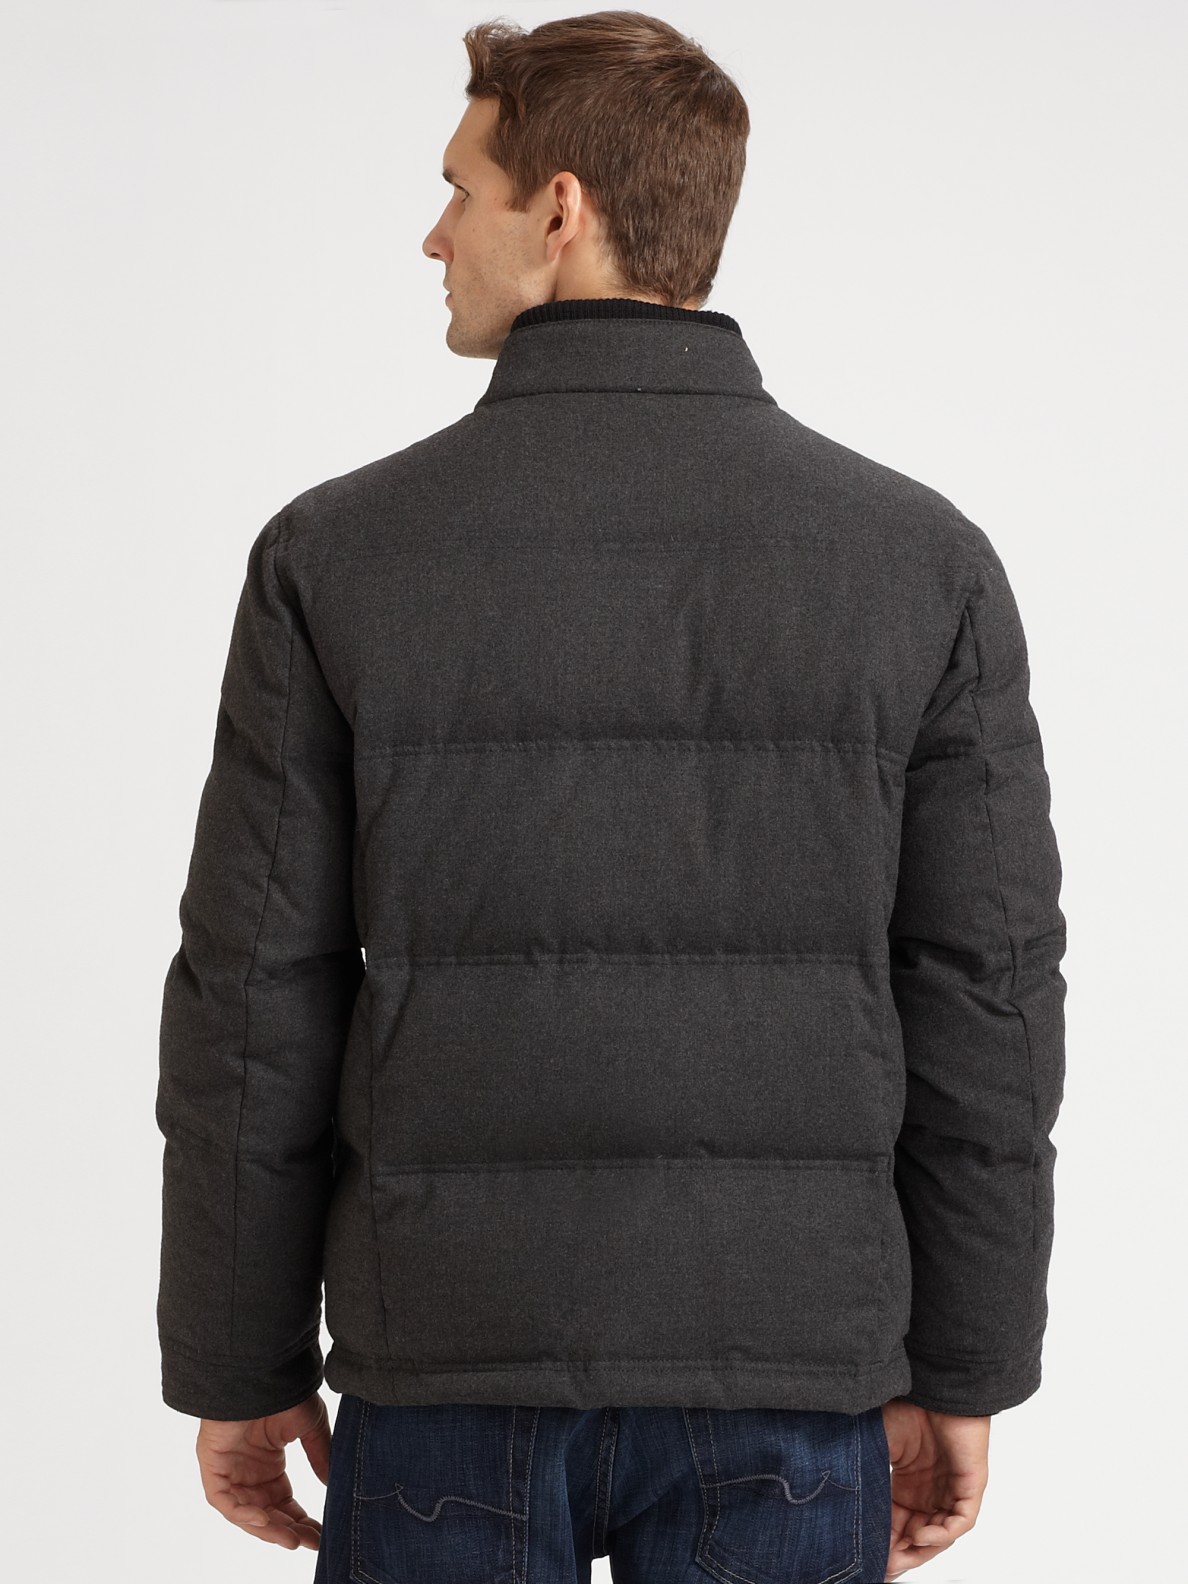 Cole haan Flannel Down Jacket in Gray for Men | Lyst